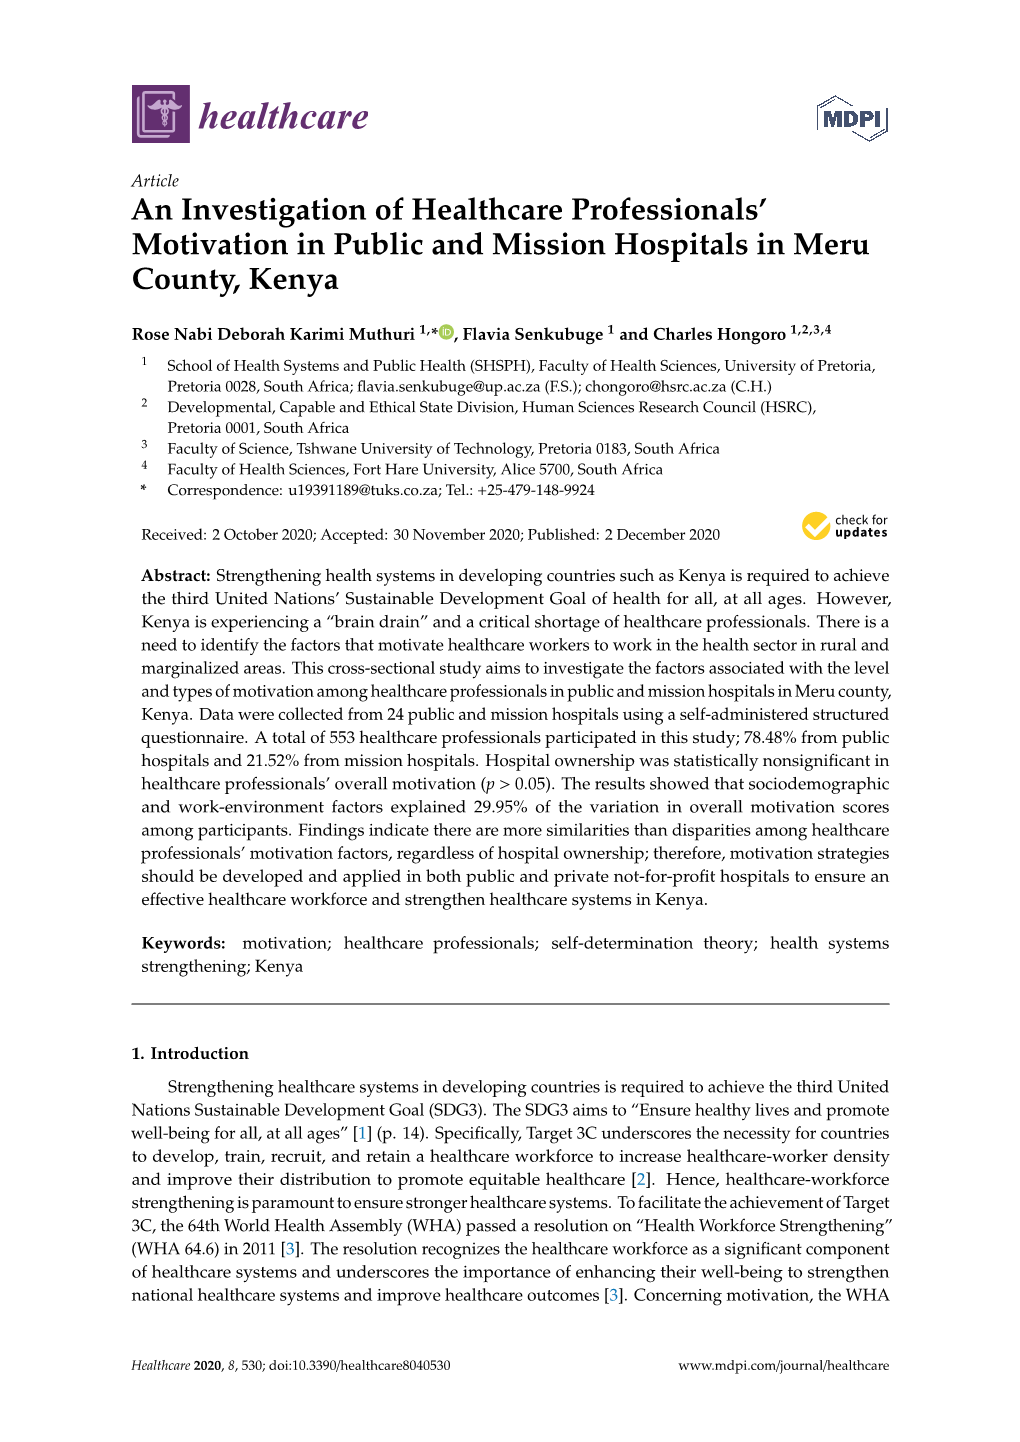 An Investigation of Healthcare Professionals' Motivation in Public